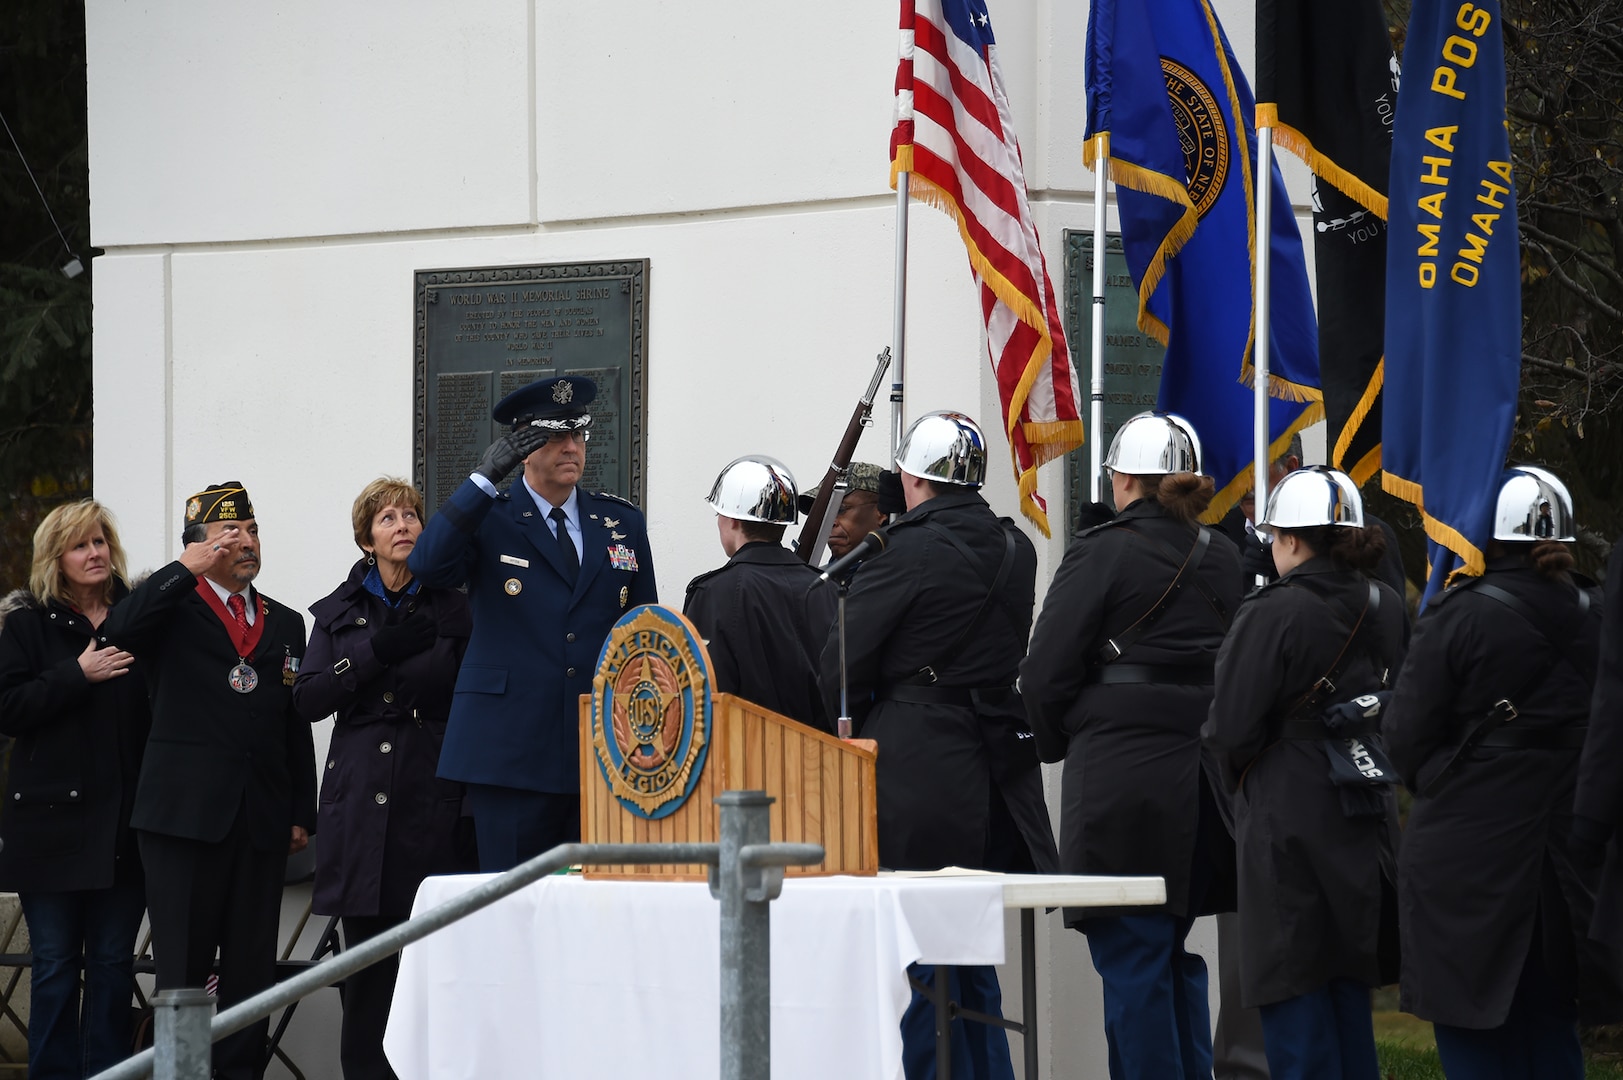 U.S. Air Force Gen. John Hyten, commander of U.S. Strategic Command, and other distinguished guests pay respects to the United States flag during a Veterans Day ceremony at Memorial Park in Omaha, Neb., Nov. 11, 2017. More than 200 people attended the ceremony to honor the service and sacrifice of American veterans and their families.